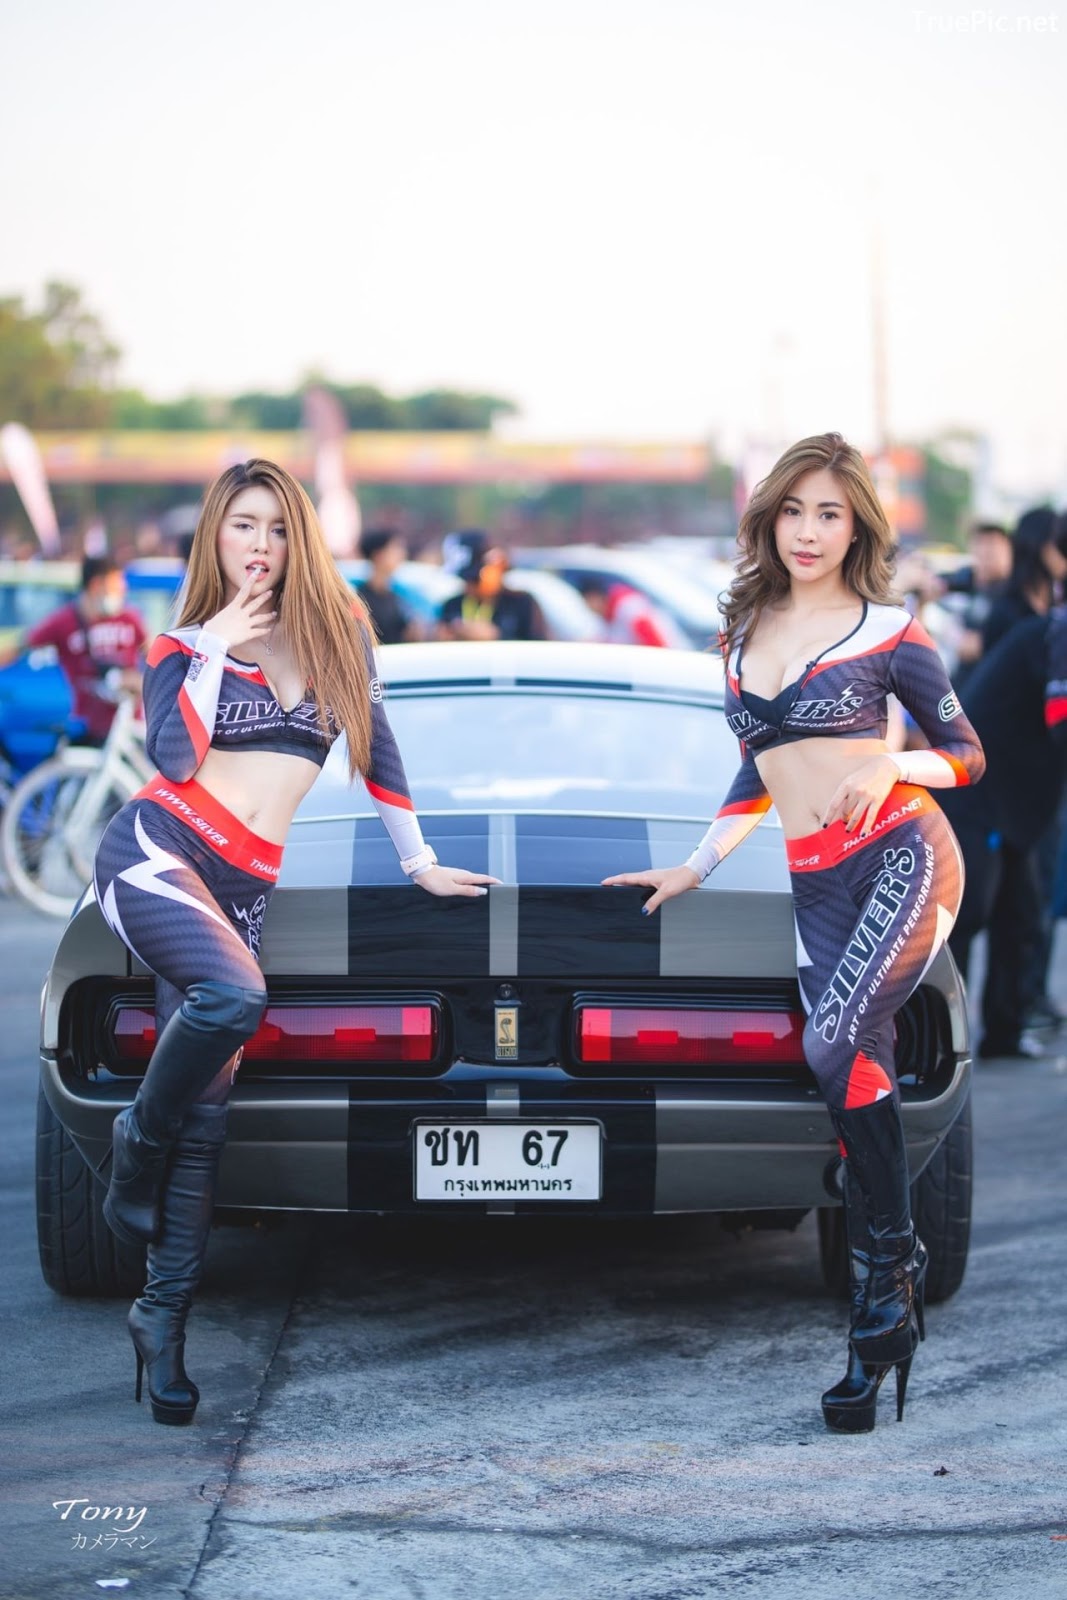 Image-Thailand-Hot-Model-Thai-Racing-Girl-At-Pathum-Thani-Speedway-TruePic.net- Picture-8